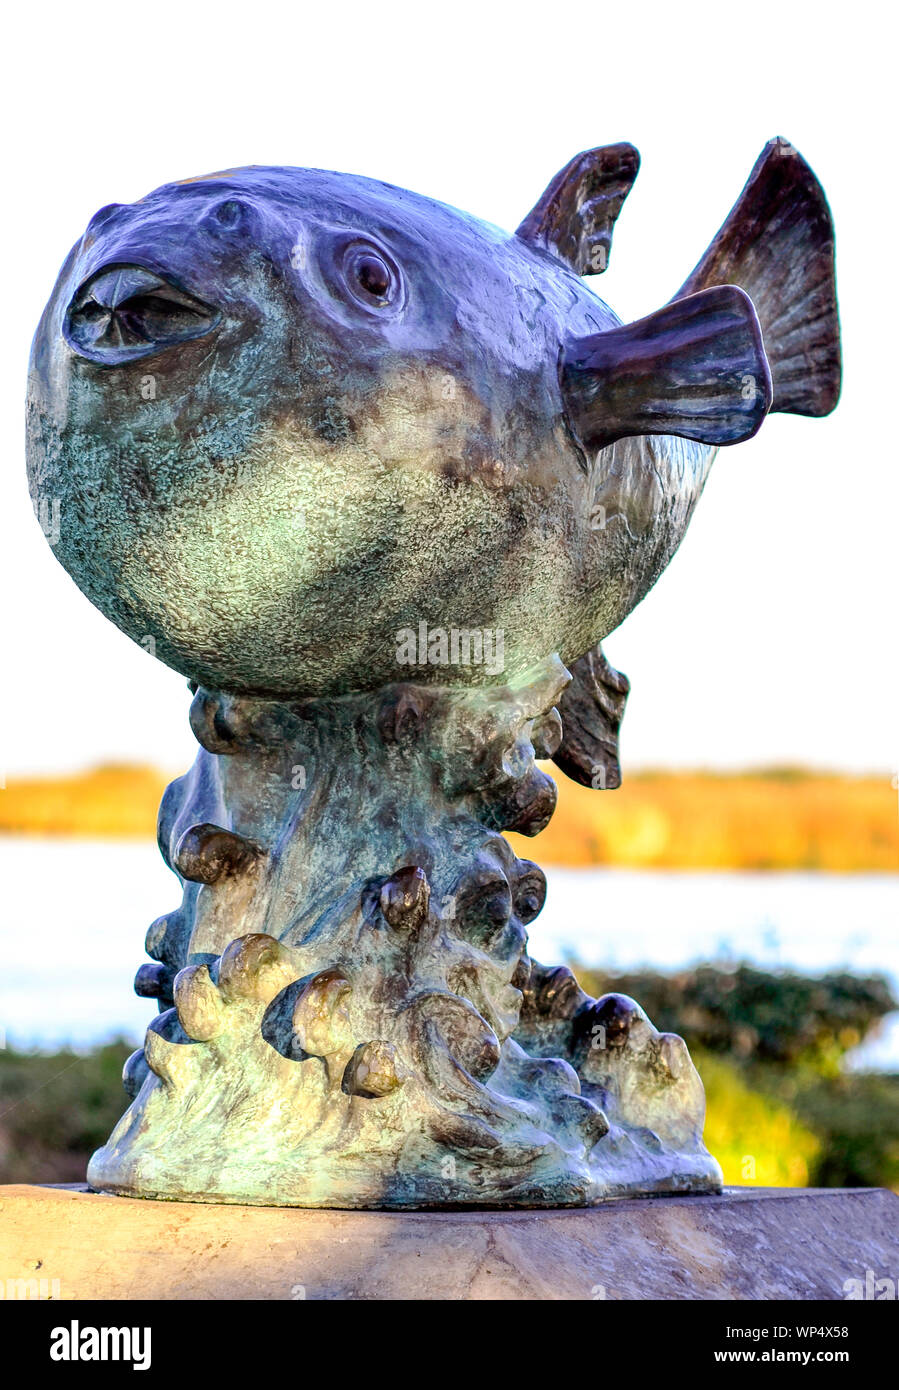 Bronze sculpture of a fugu fish, a gift from sister city Shiminoseki, Japan to Pittsburg, California USA. San Joaquin River in the background. Stock Photo